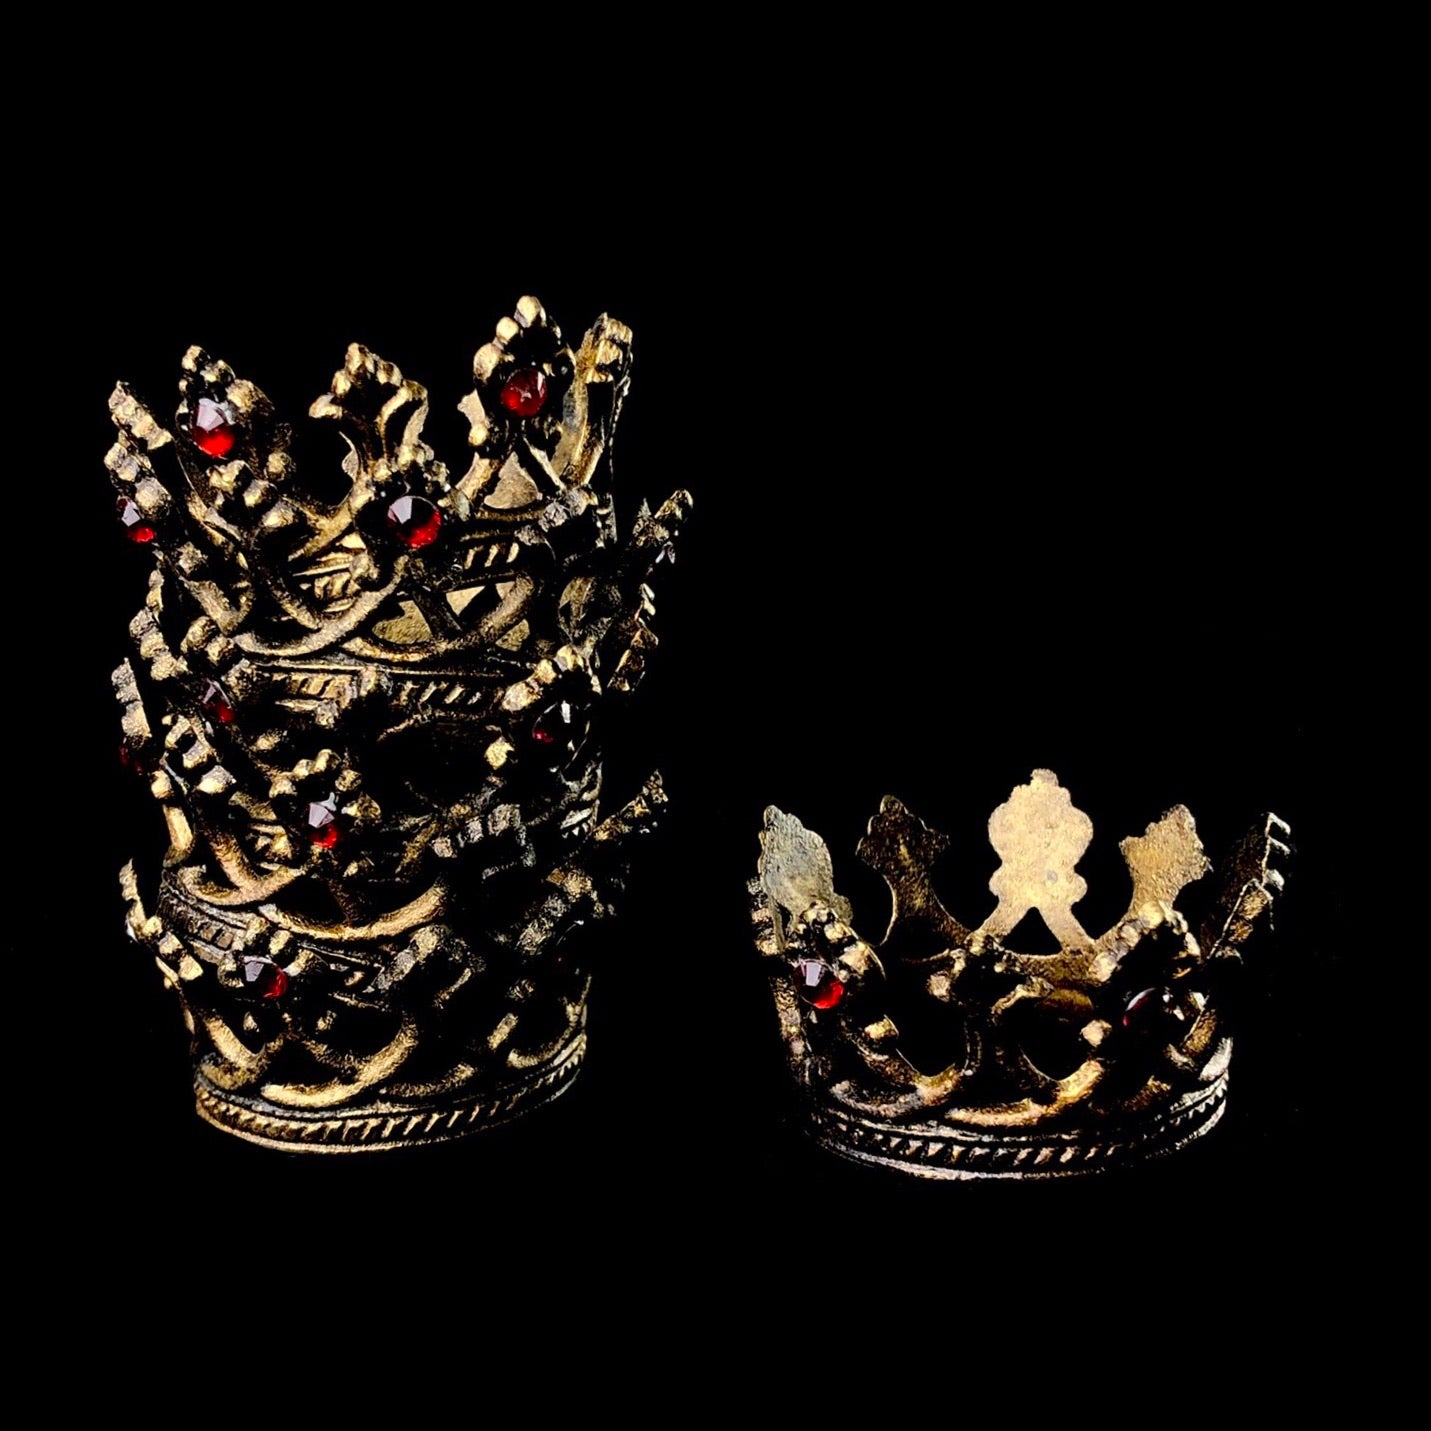 Stack of Mini Crowns to the left of single crown